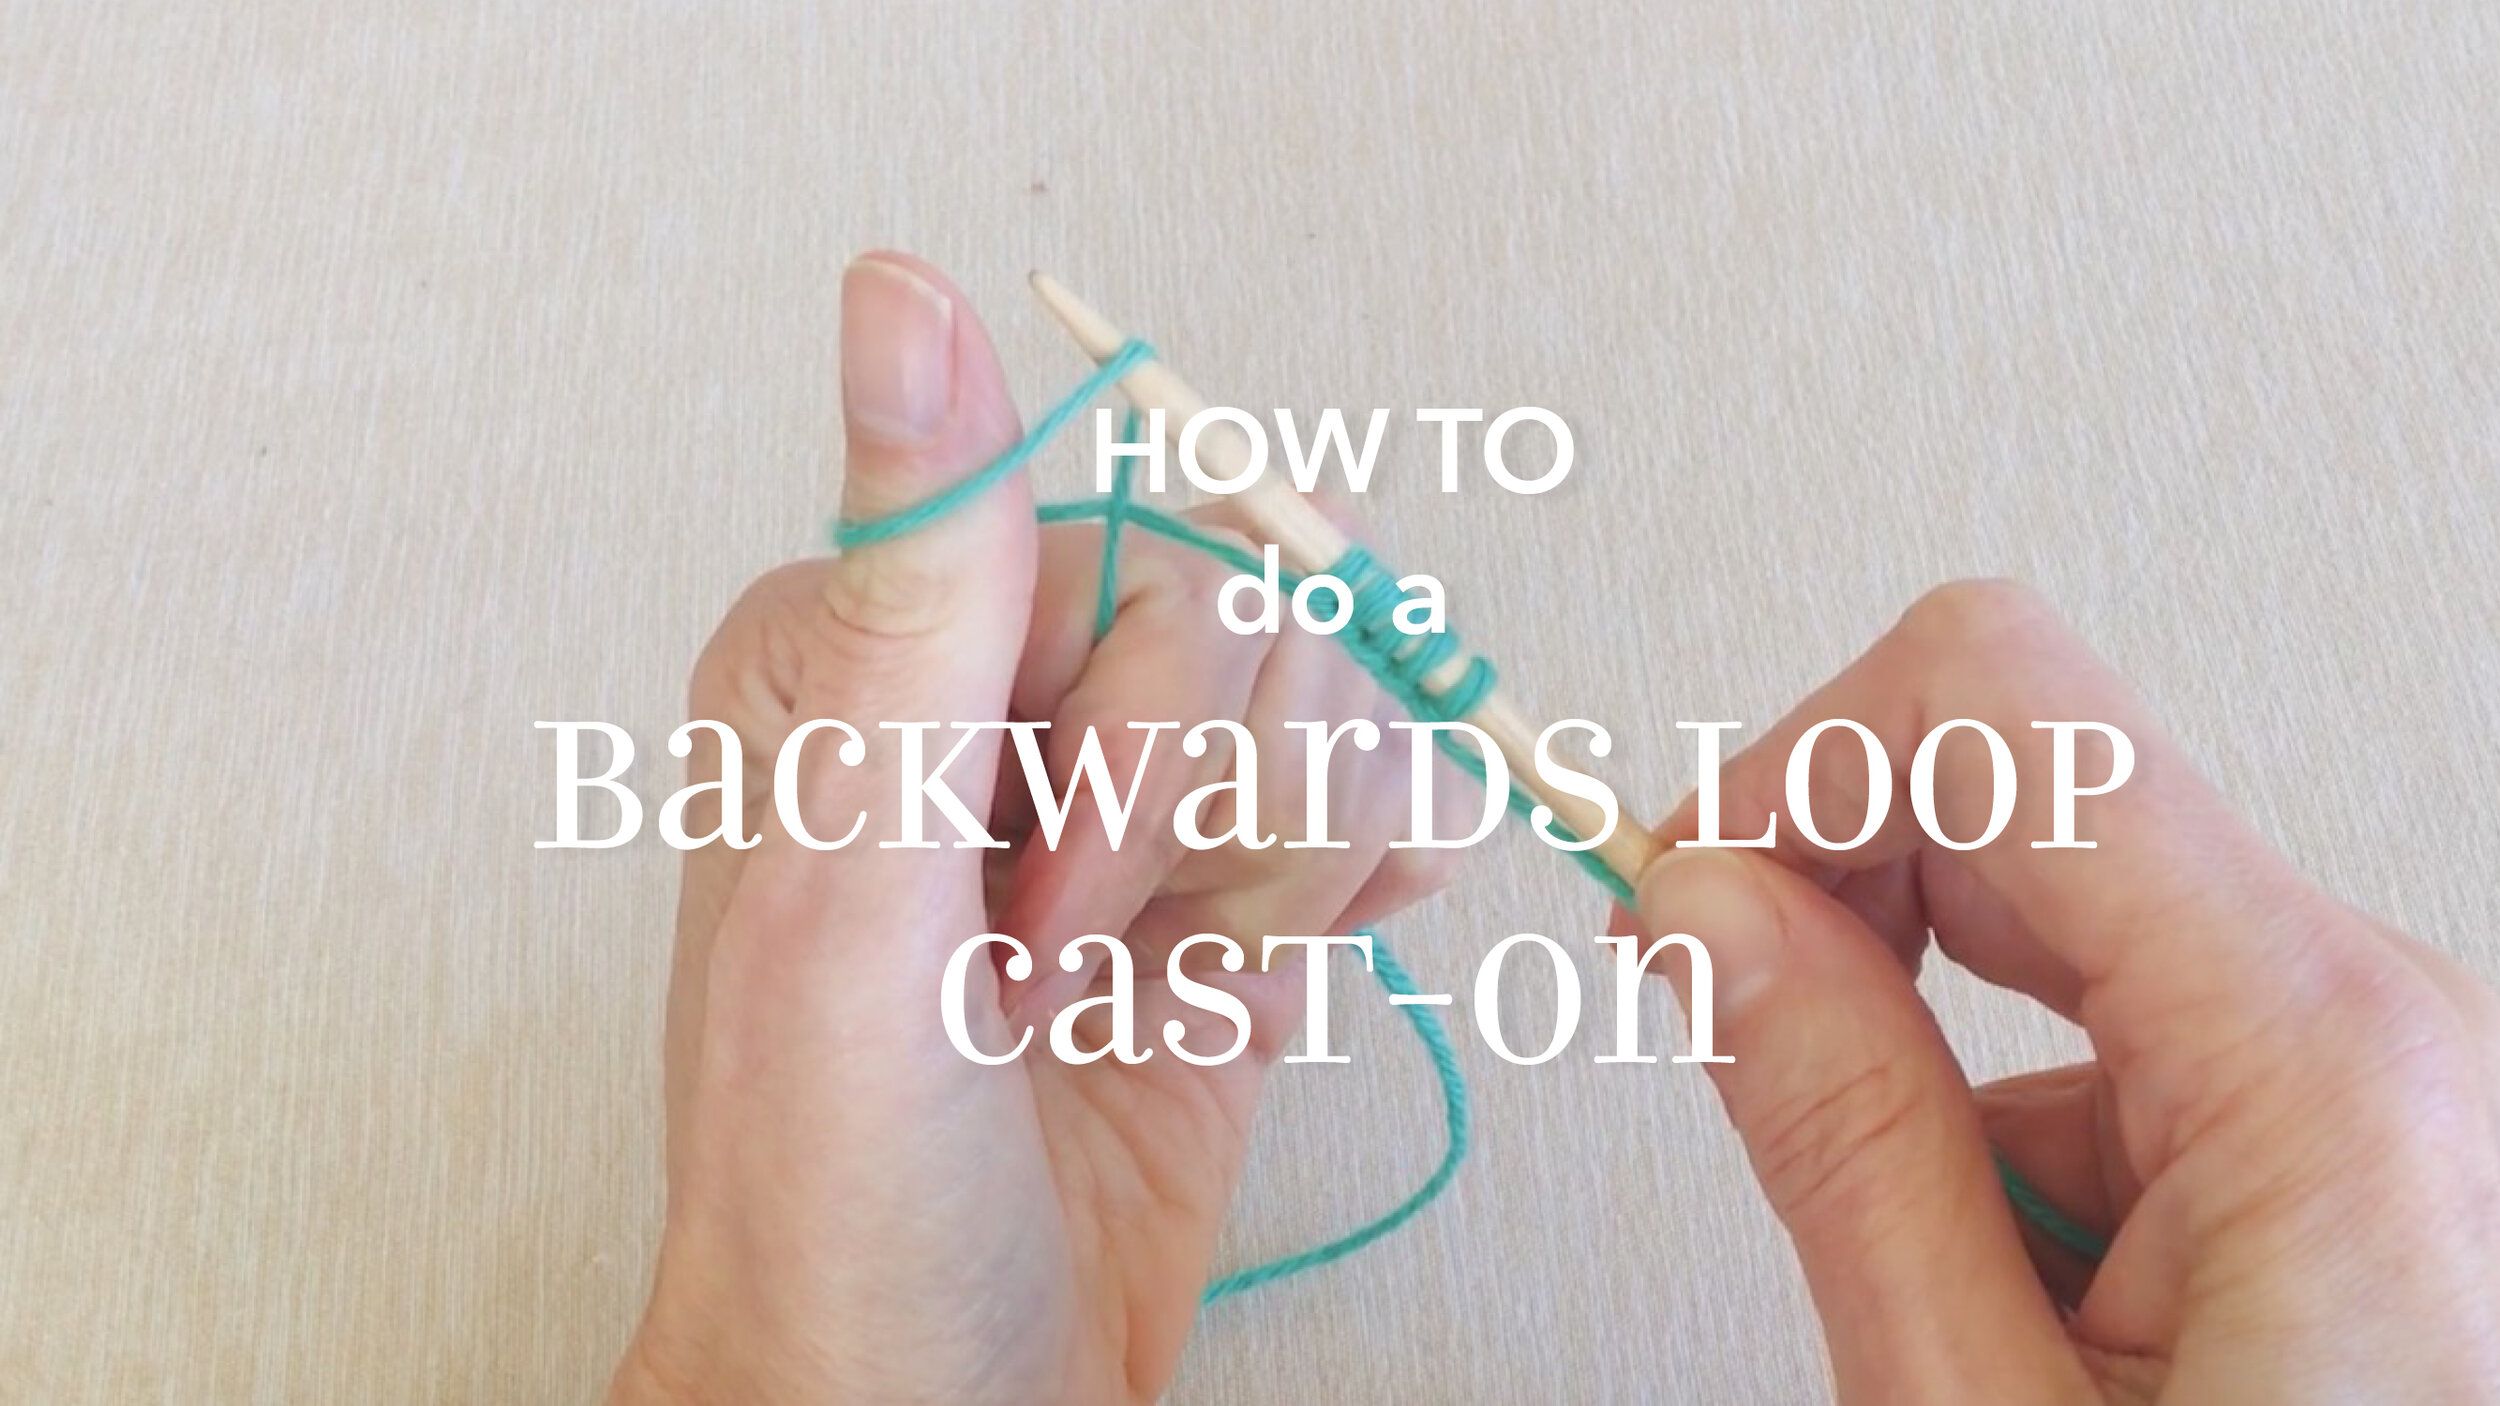 How to do the Backwards Loop Cast-On